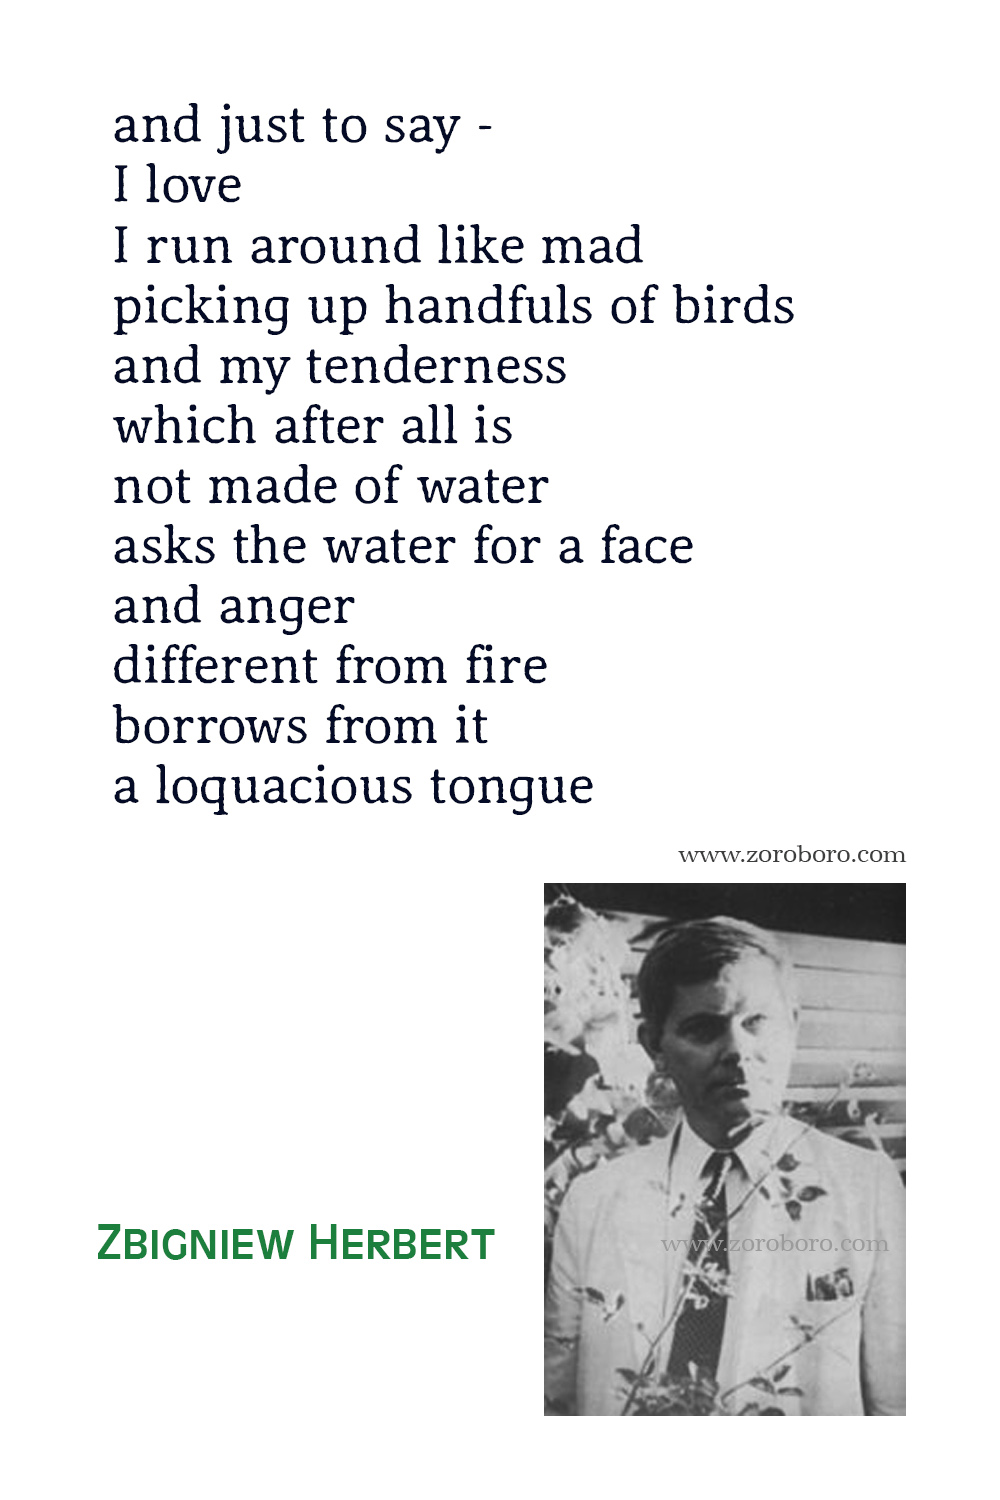 Zbigniew Herbert Quotes, Zbigniew Herbert Poems, Zbigniew Herbert Poetry, Zbigniew Herbert Wiersze, The Collected Poems 1956 - 1998